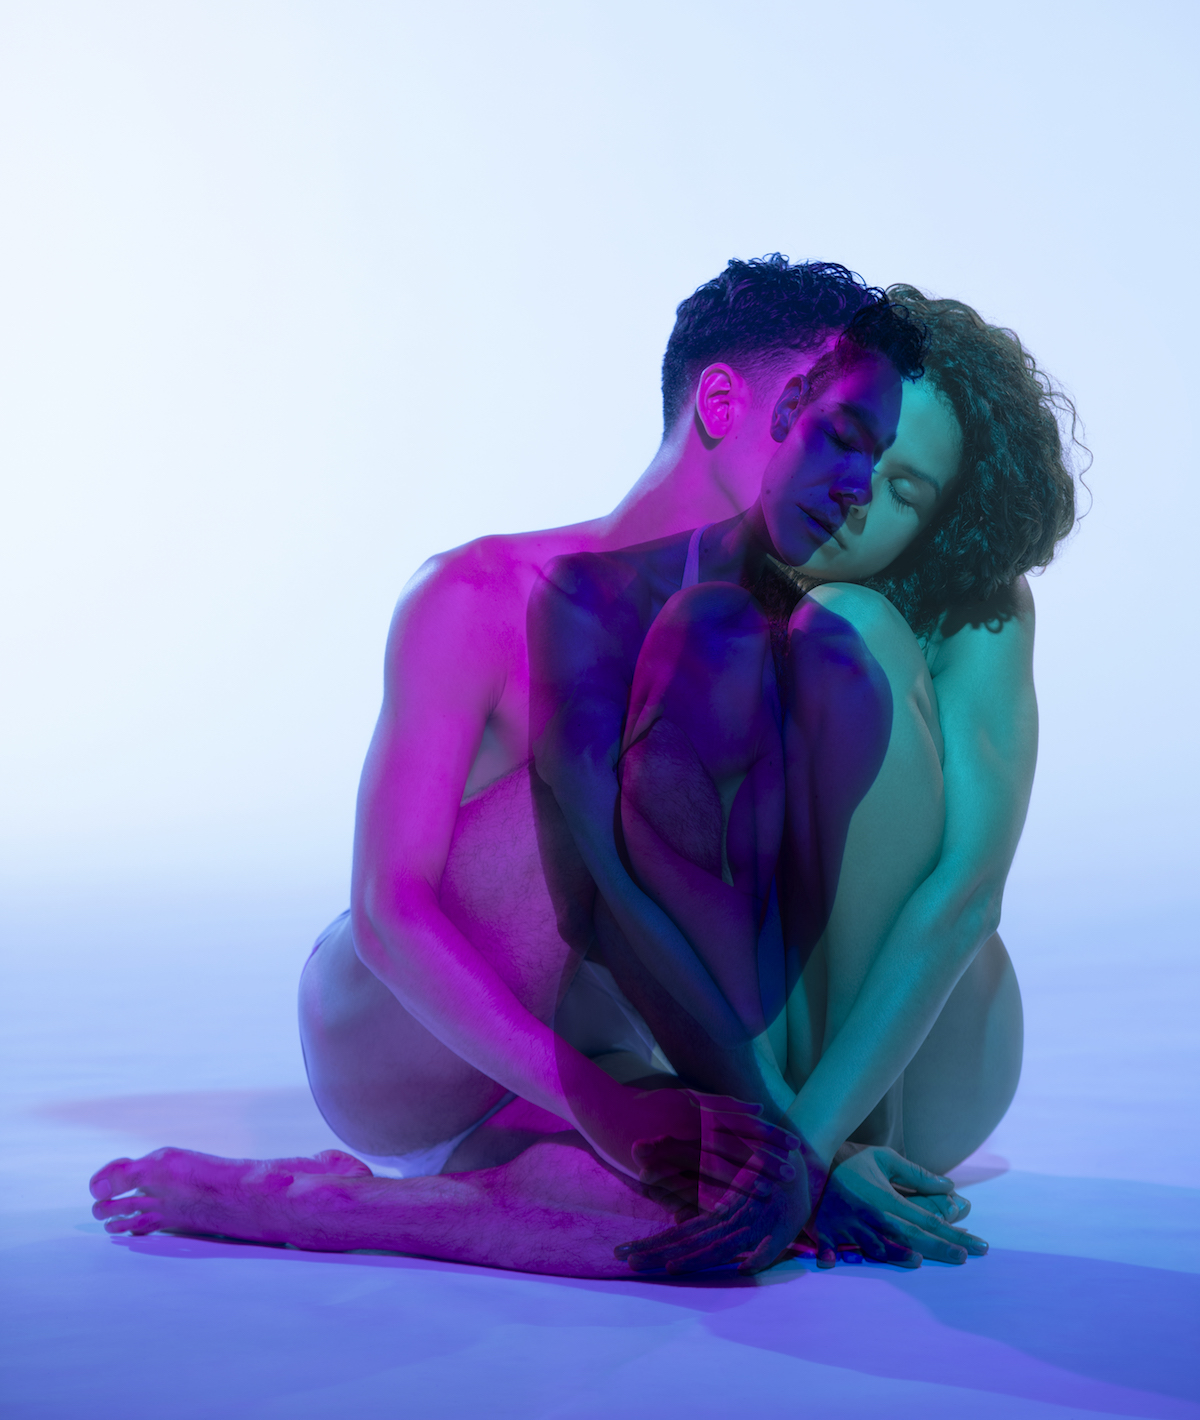 Two people's bodies saturated in purple and green. Their bodies overlap.